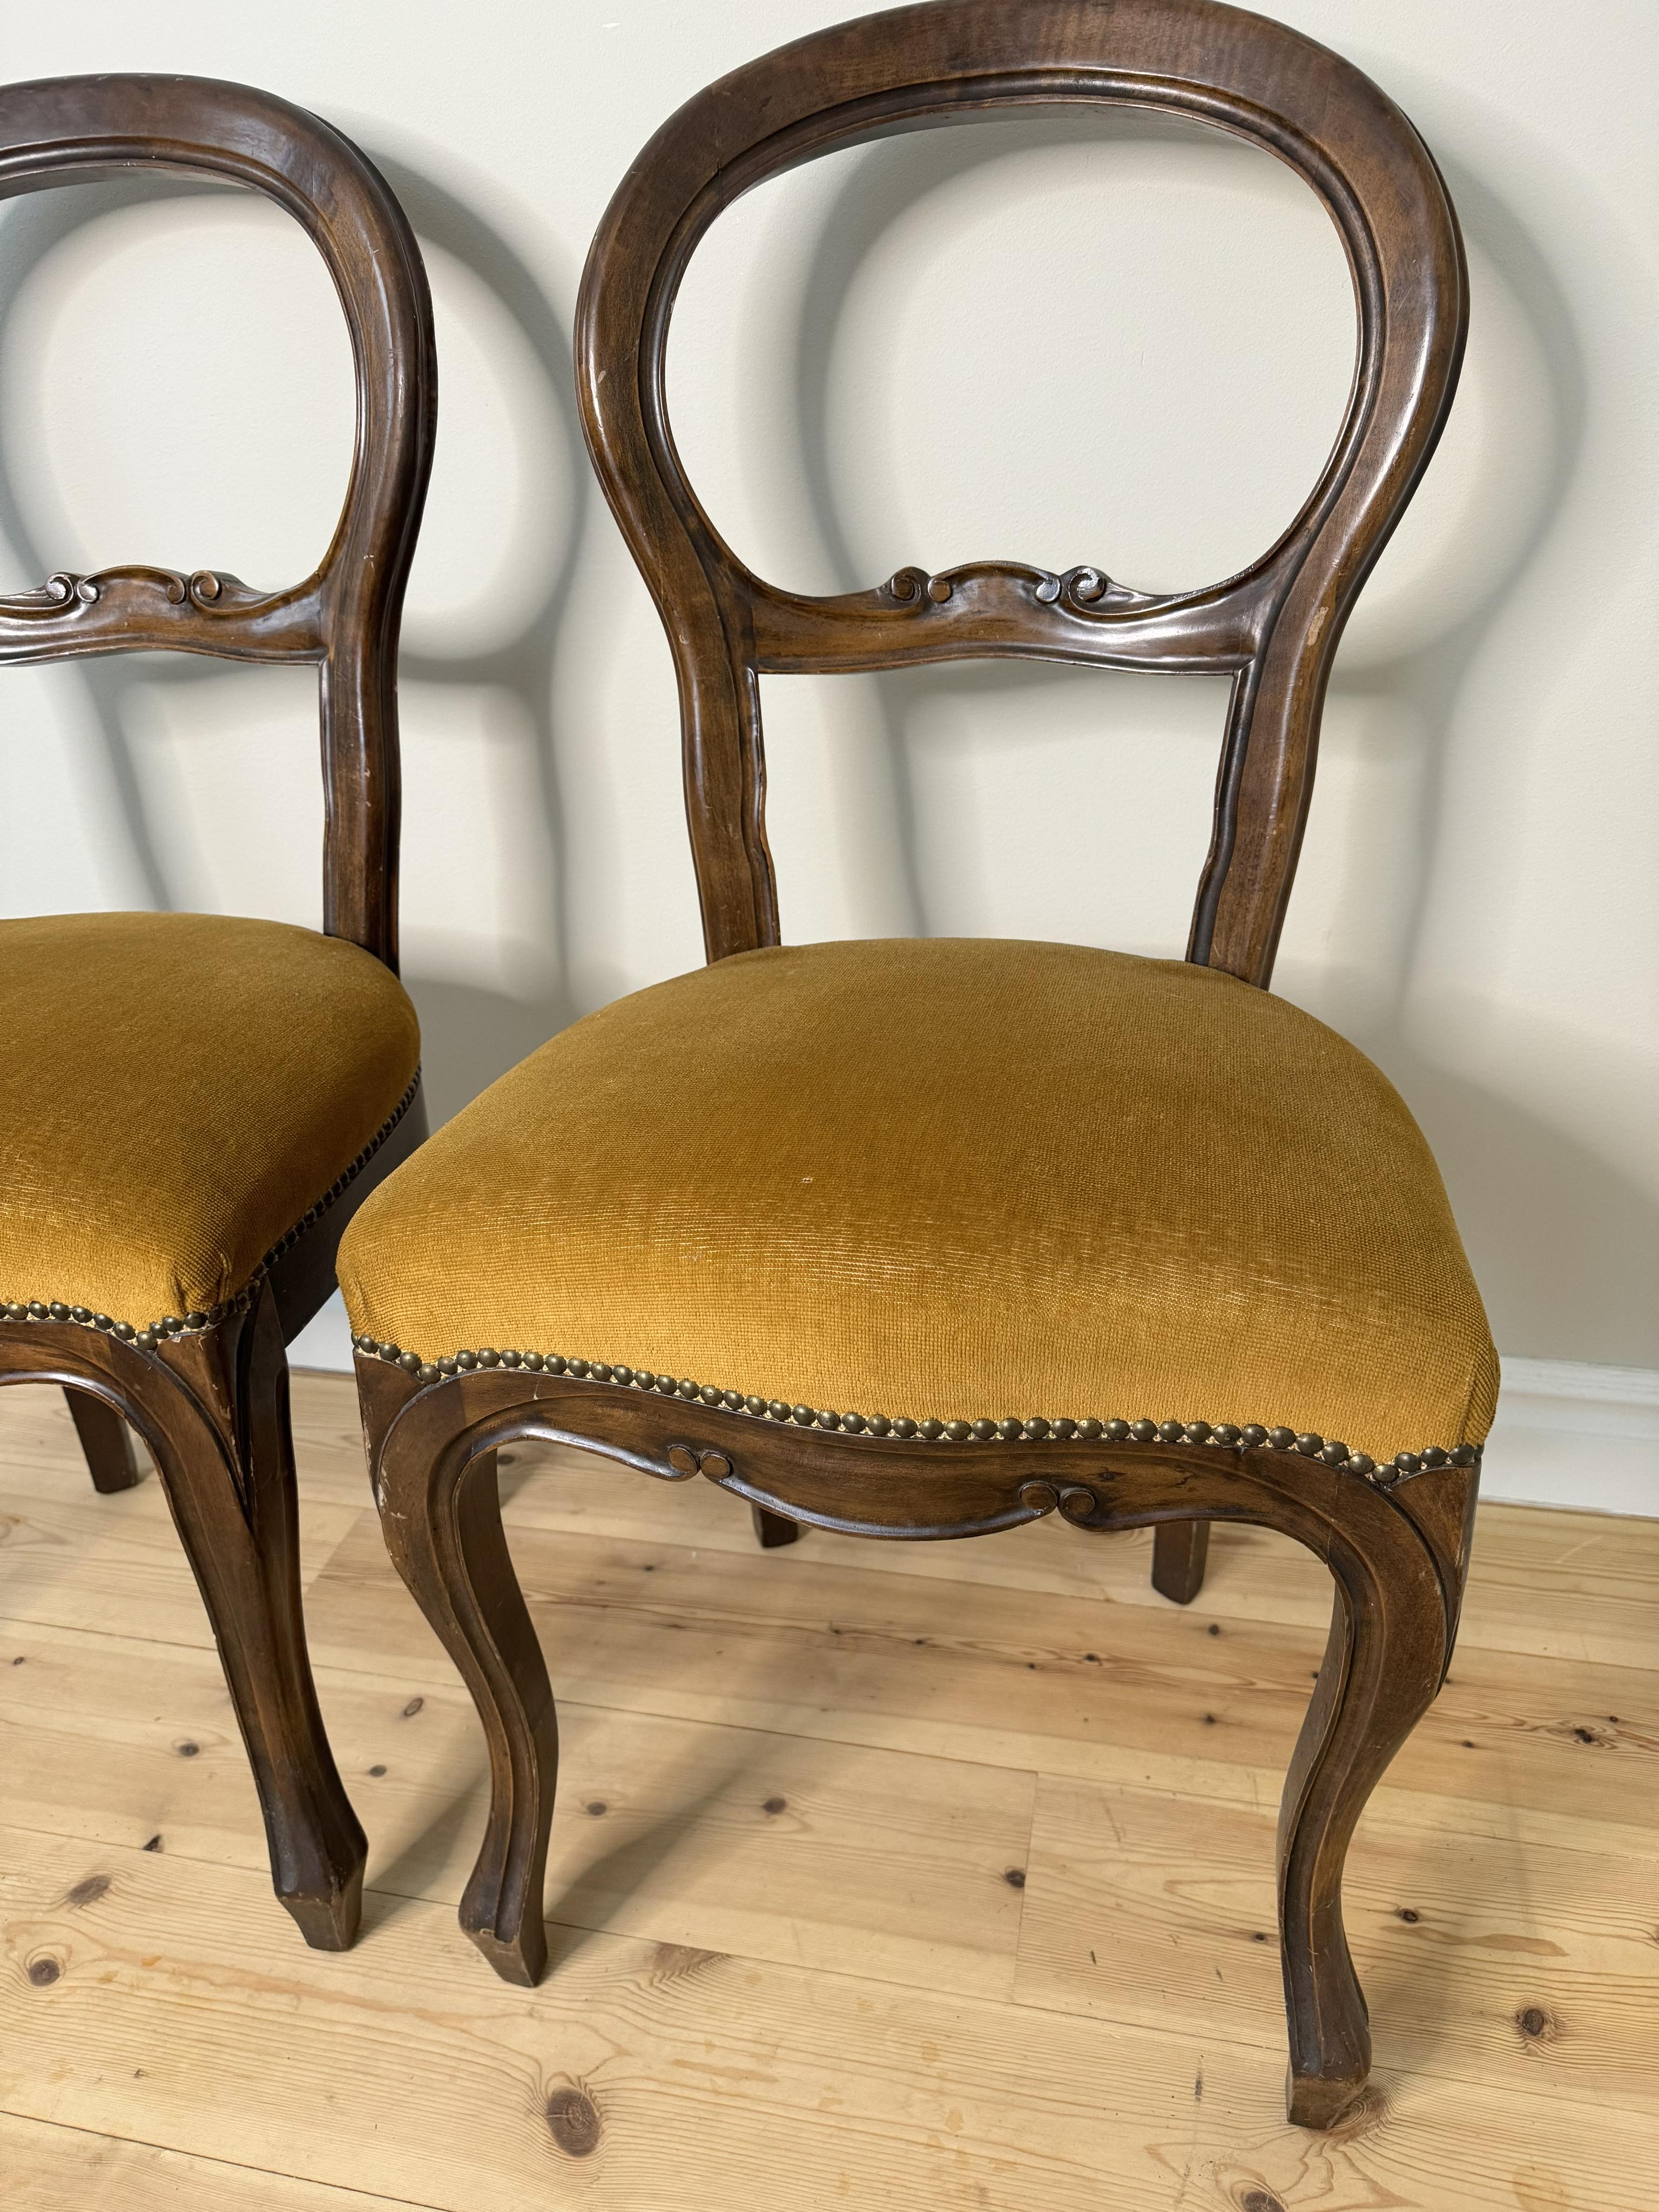 Chairs with yellow fabric